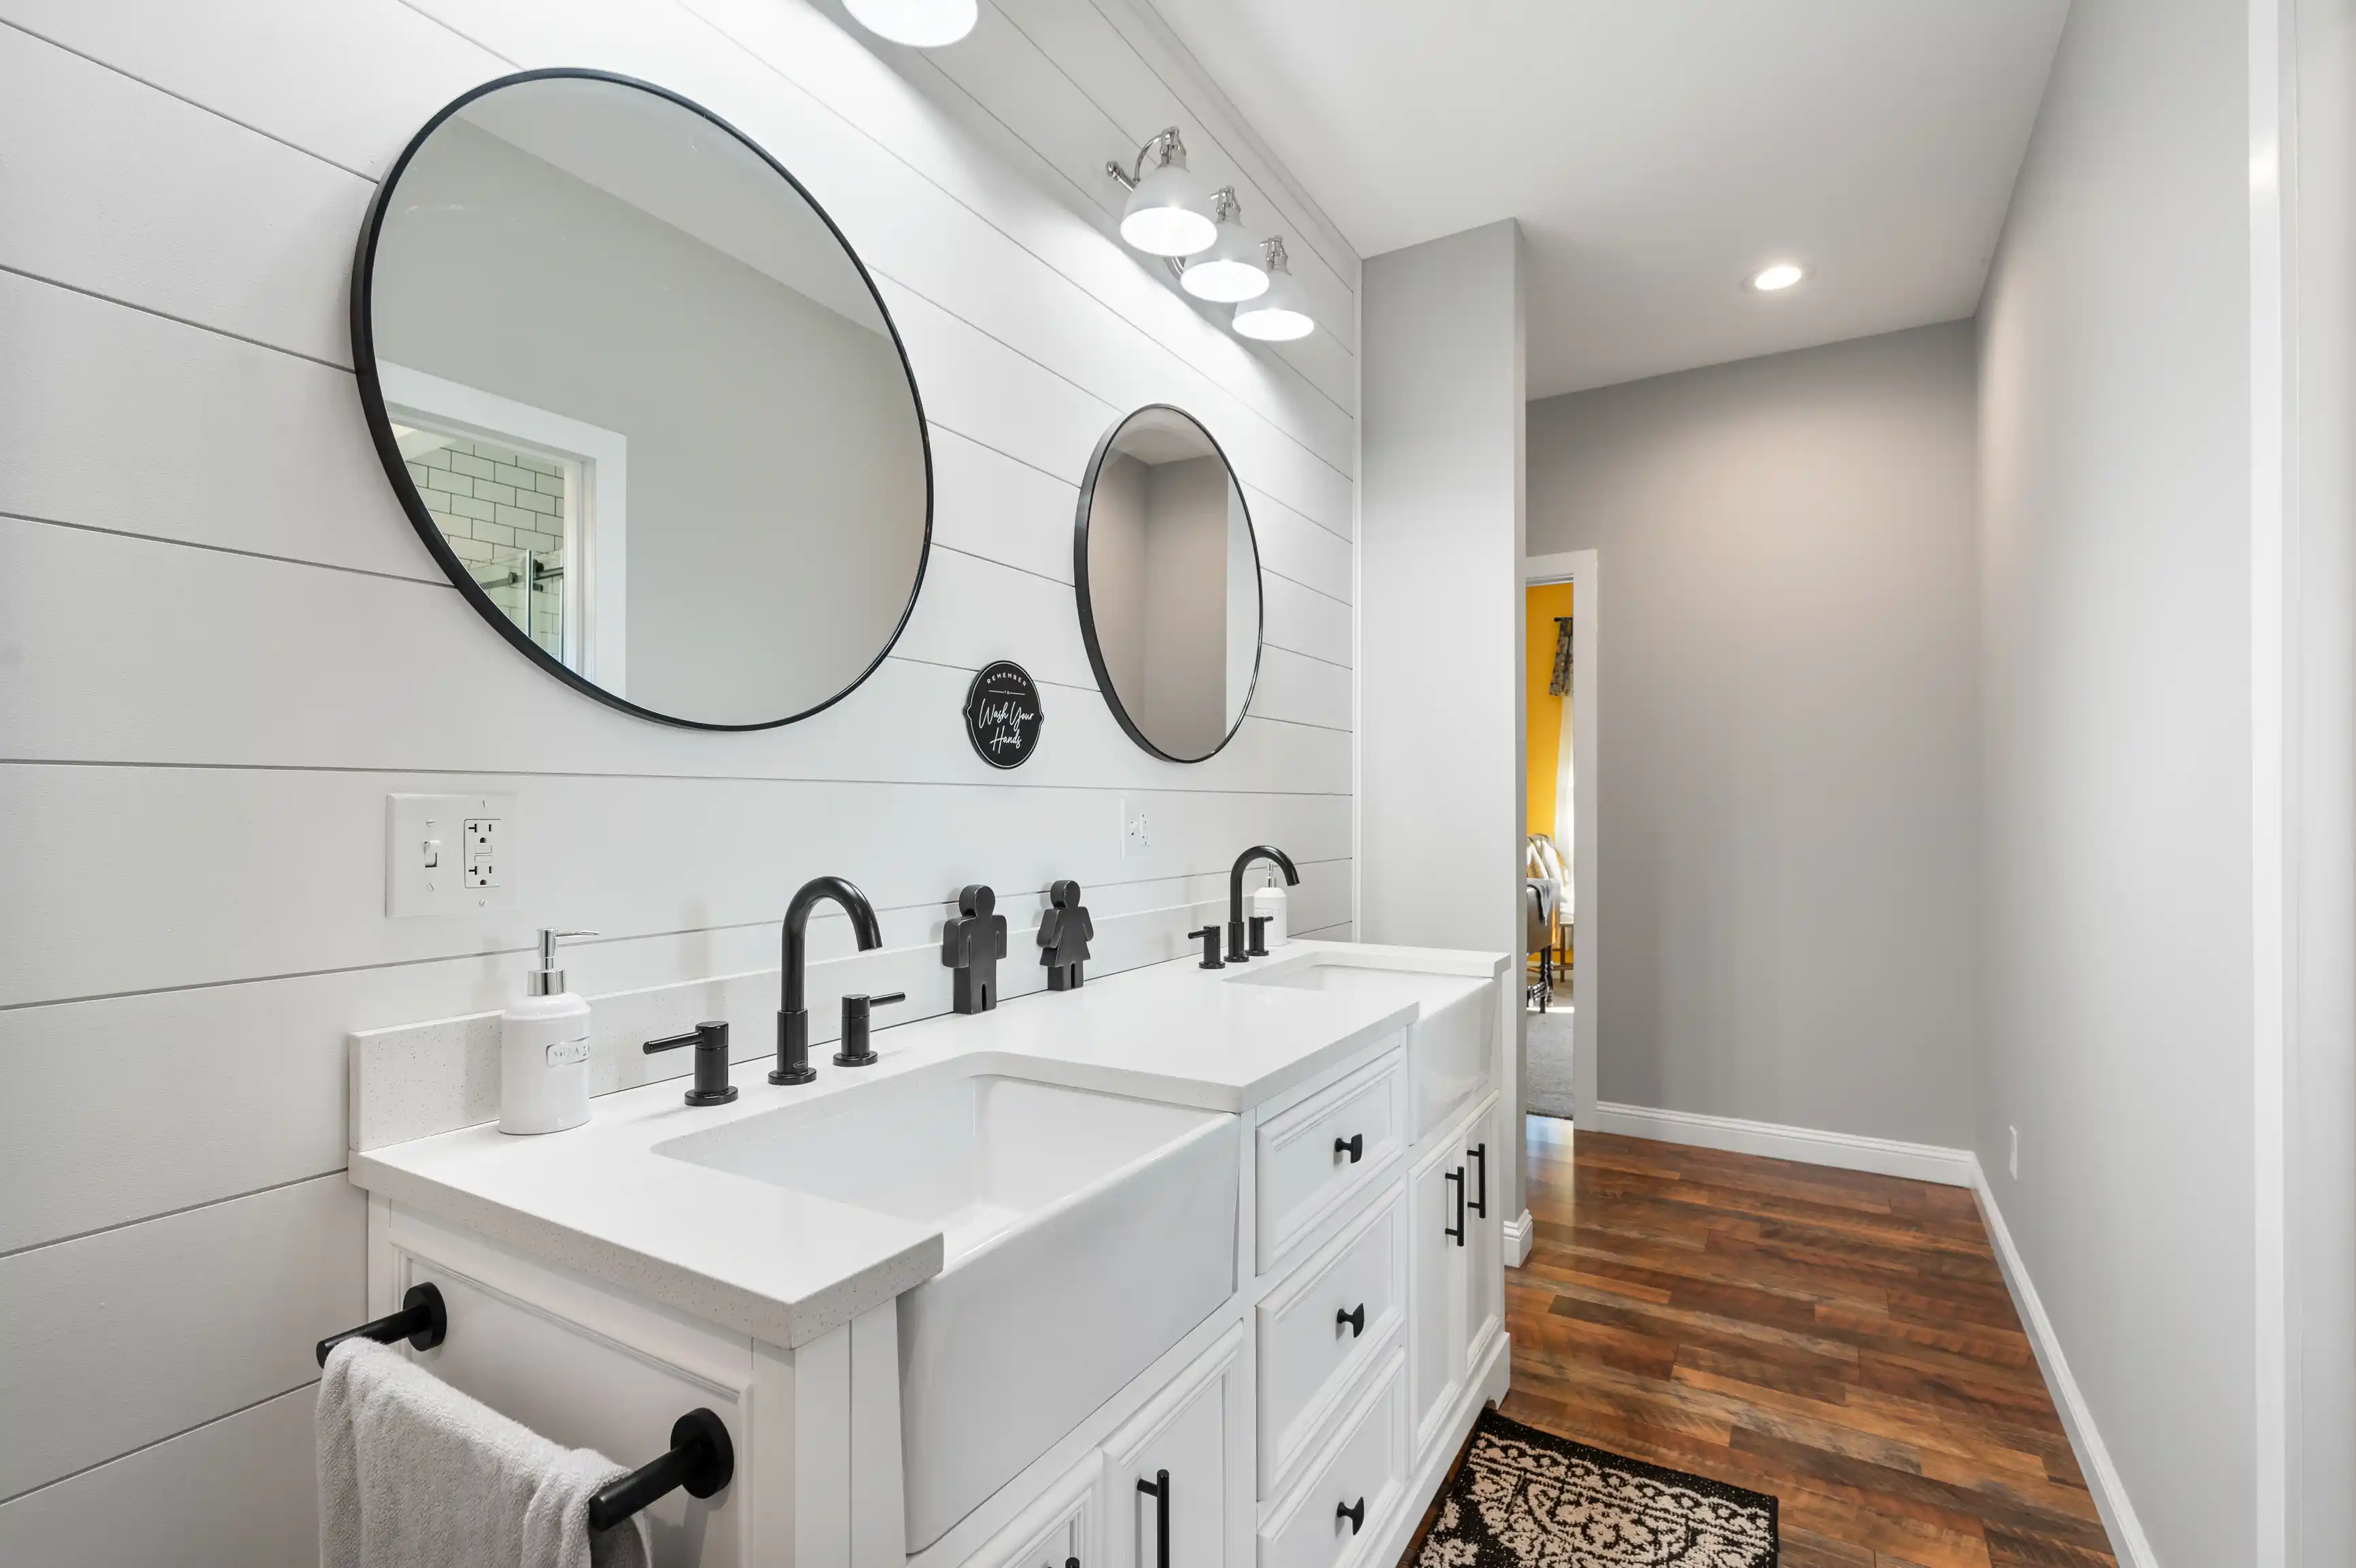 Modern bathroom interior with double sink vanity, large round mirrors, shiplap walls, and hardwood floors.